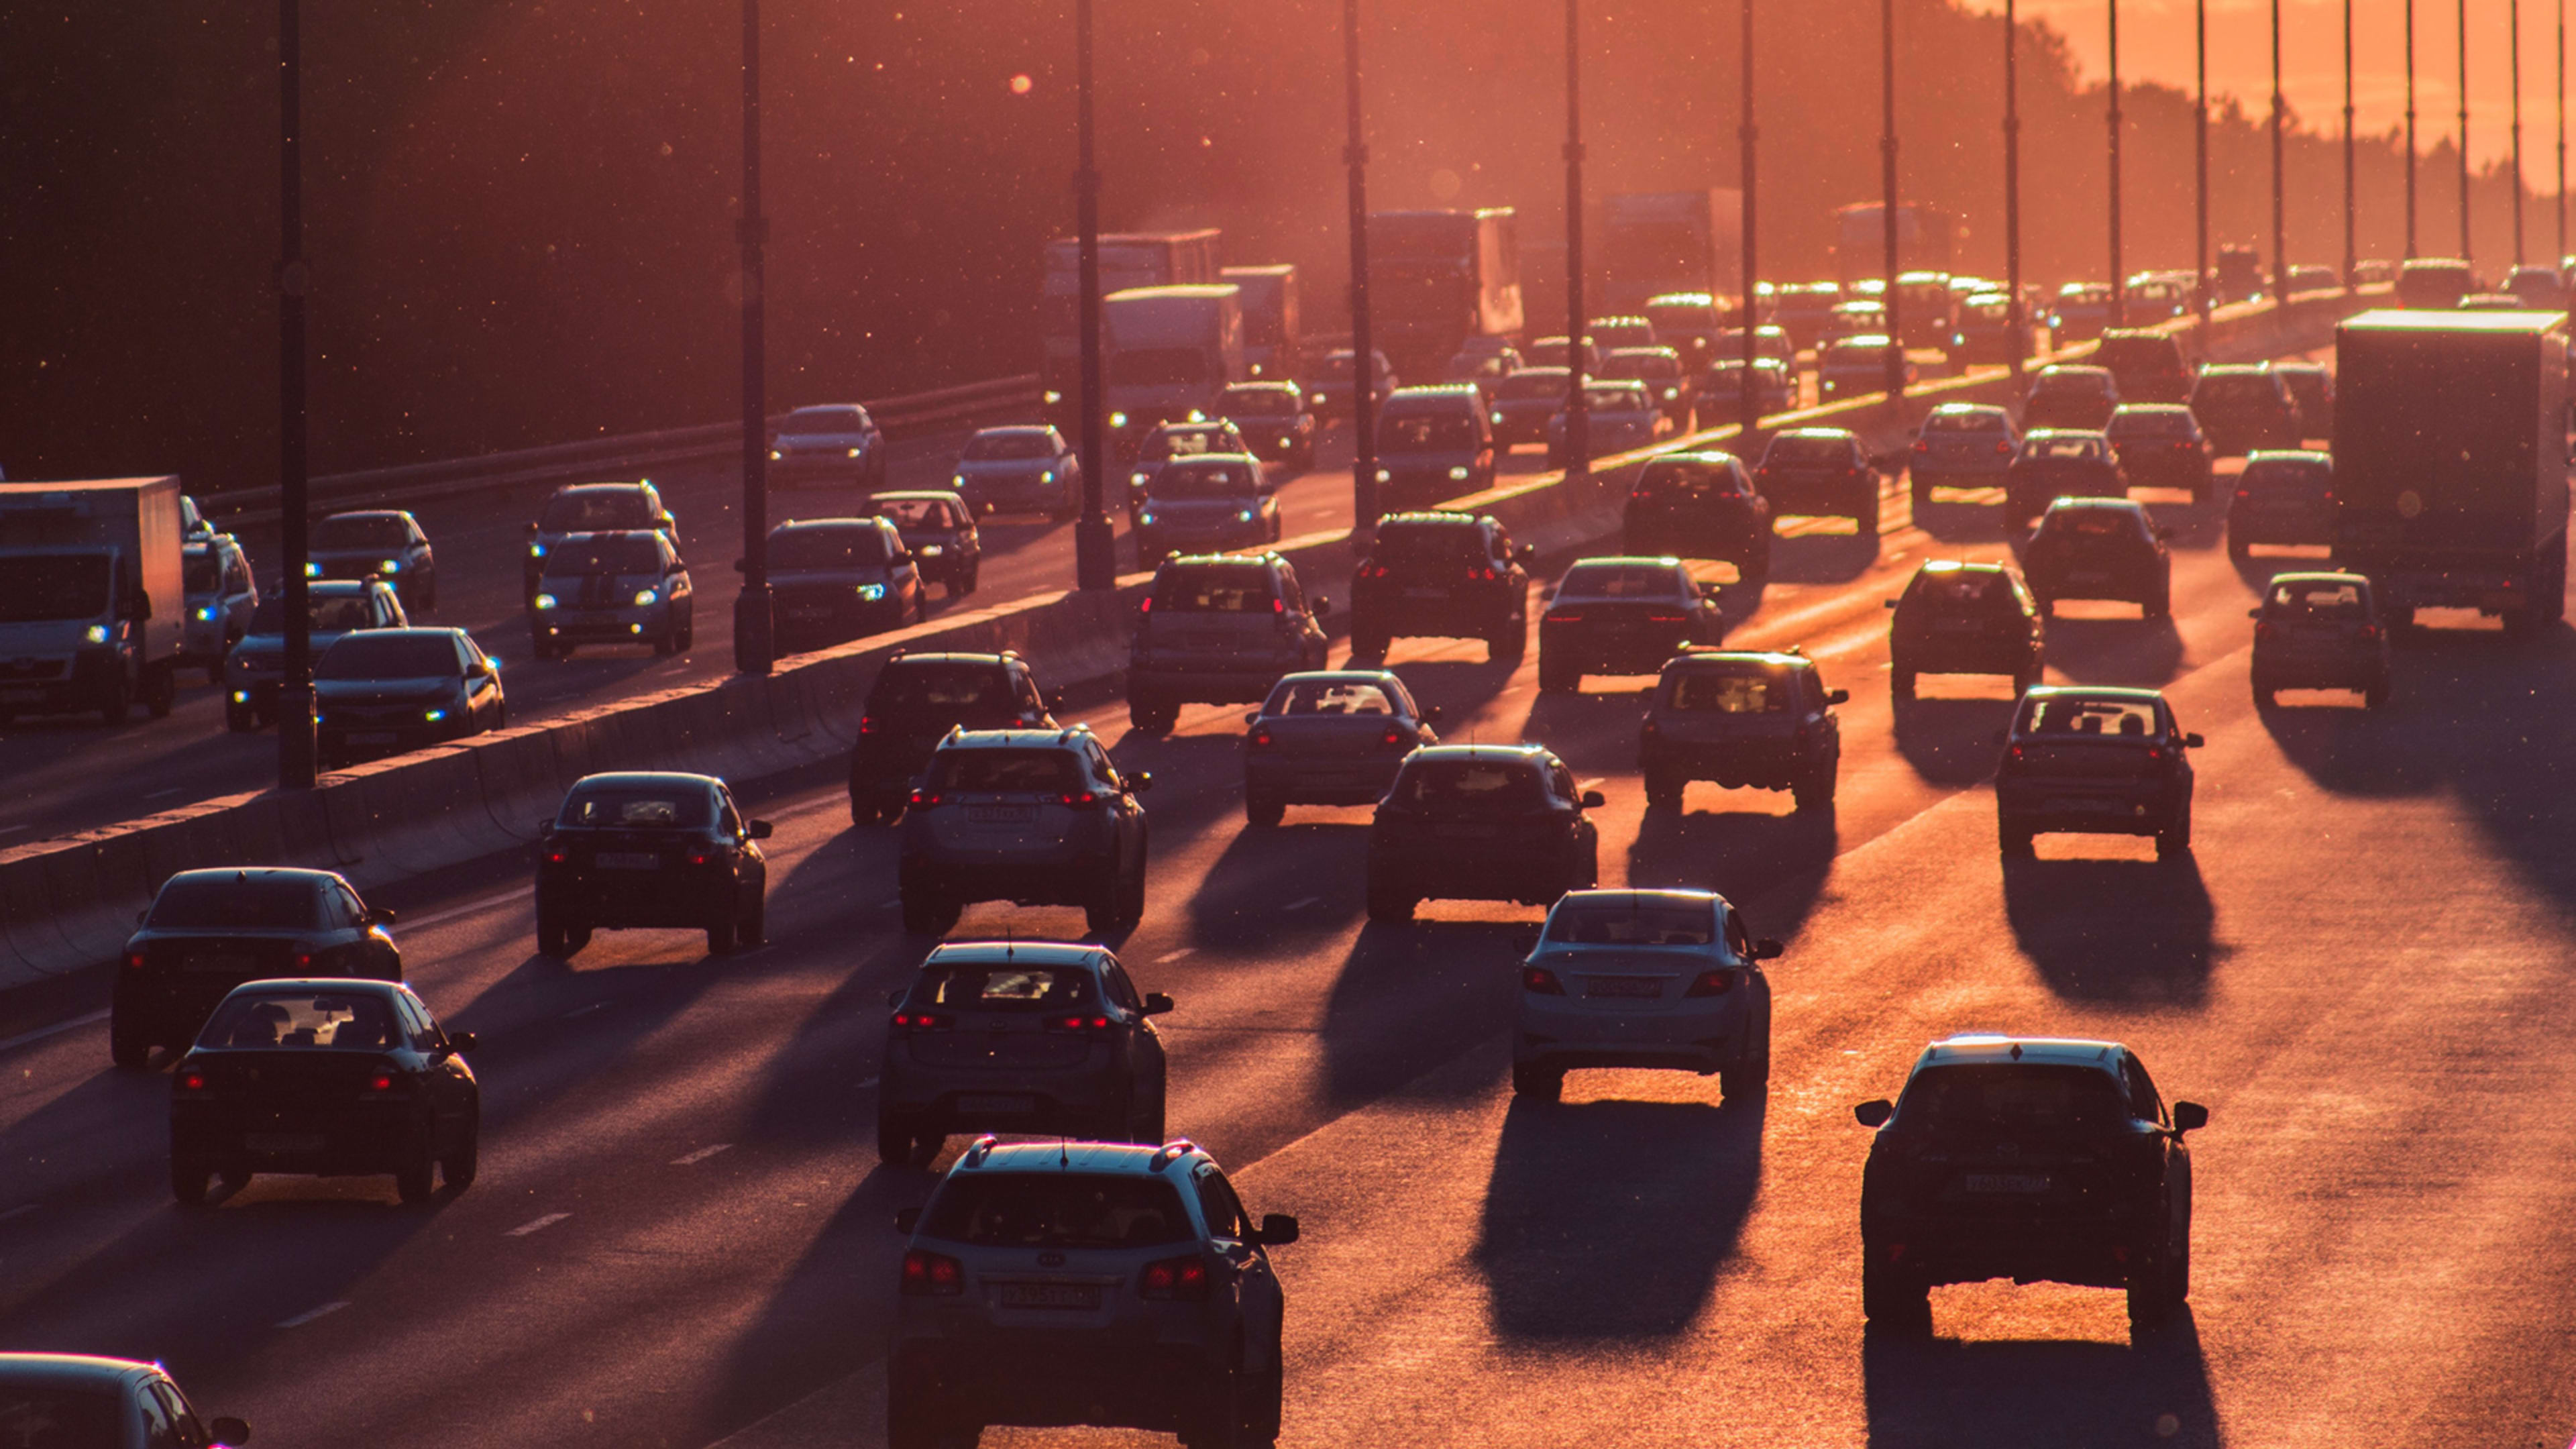 Mathematicians have solved traffic jams, and they’re begging cities to listen